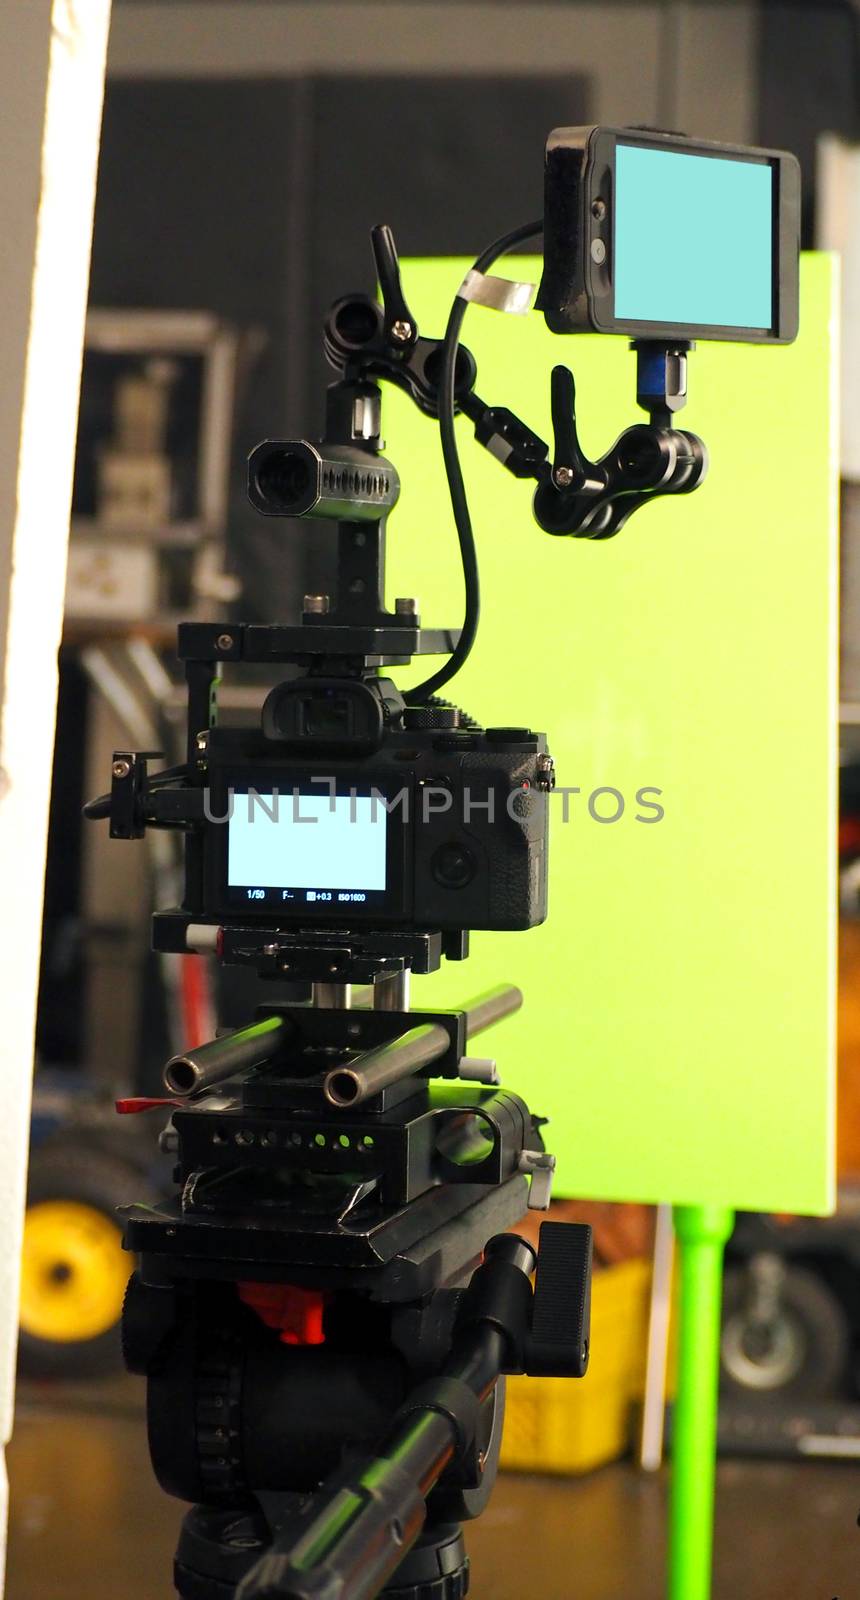 Behind the vdo camera in studio production that shooting or filming green screen background for chroma key technique in post process with professional crew teams and equipments.